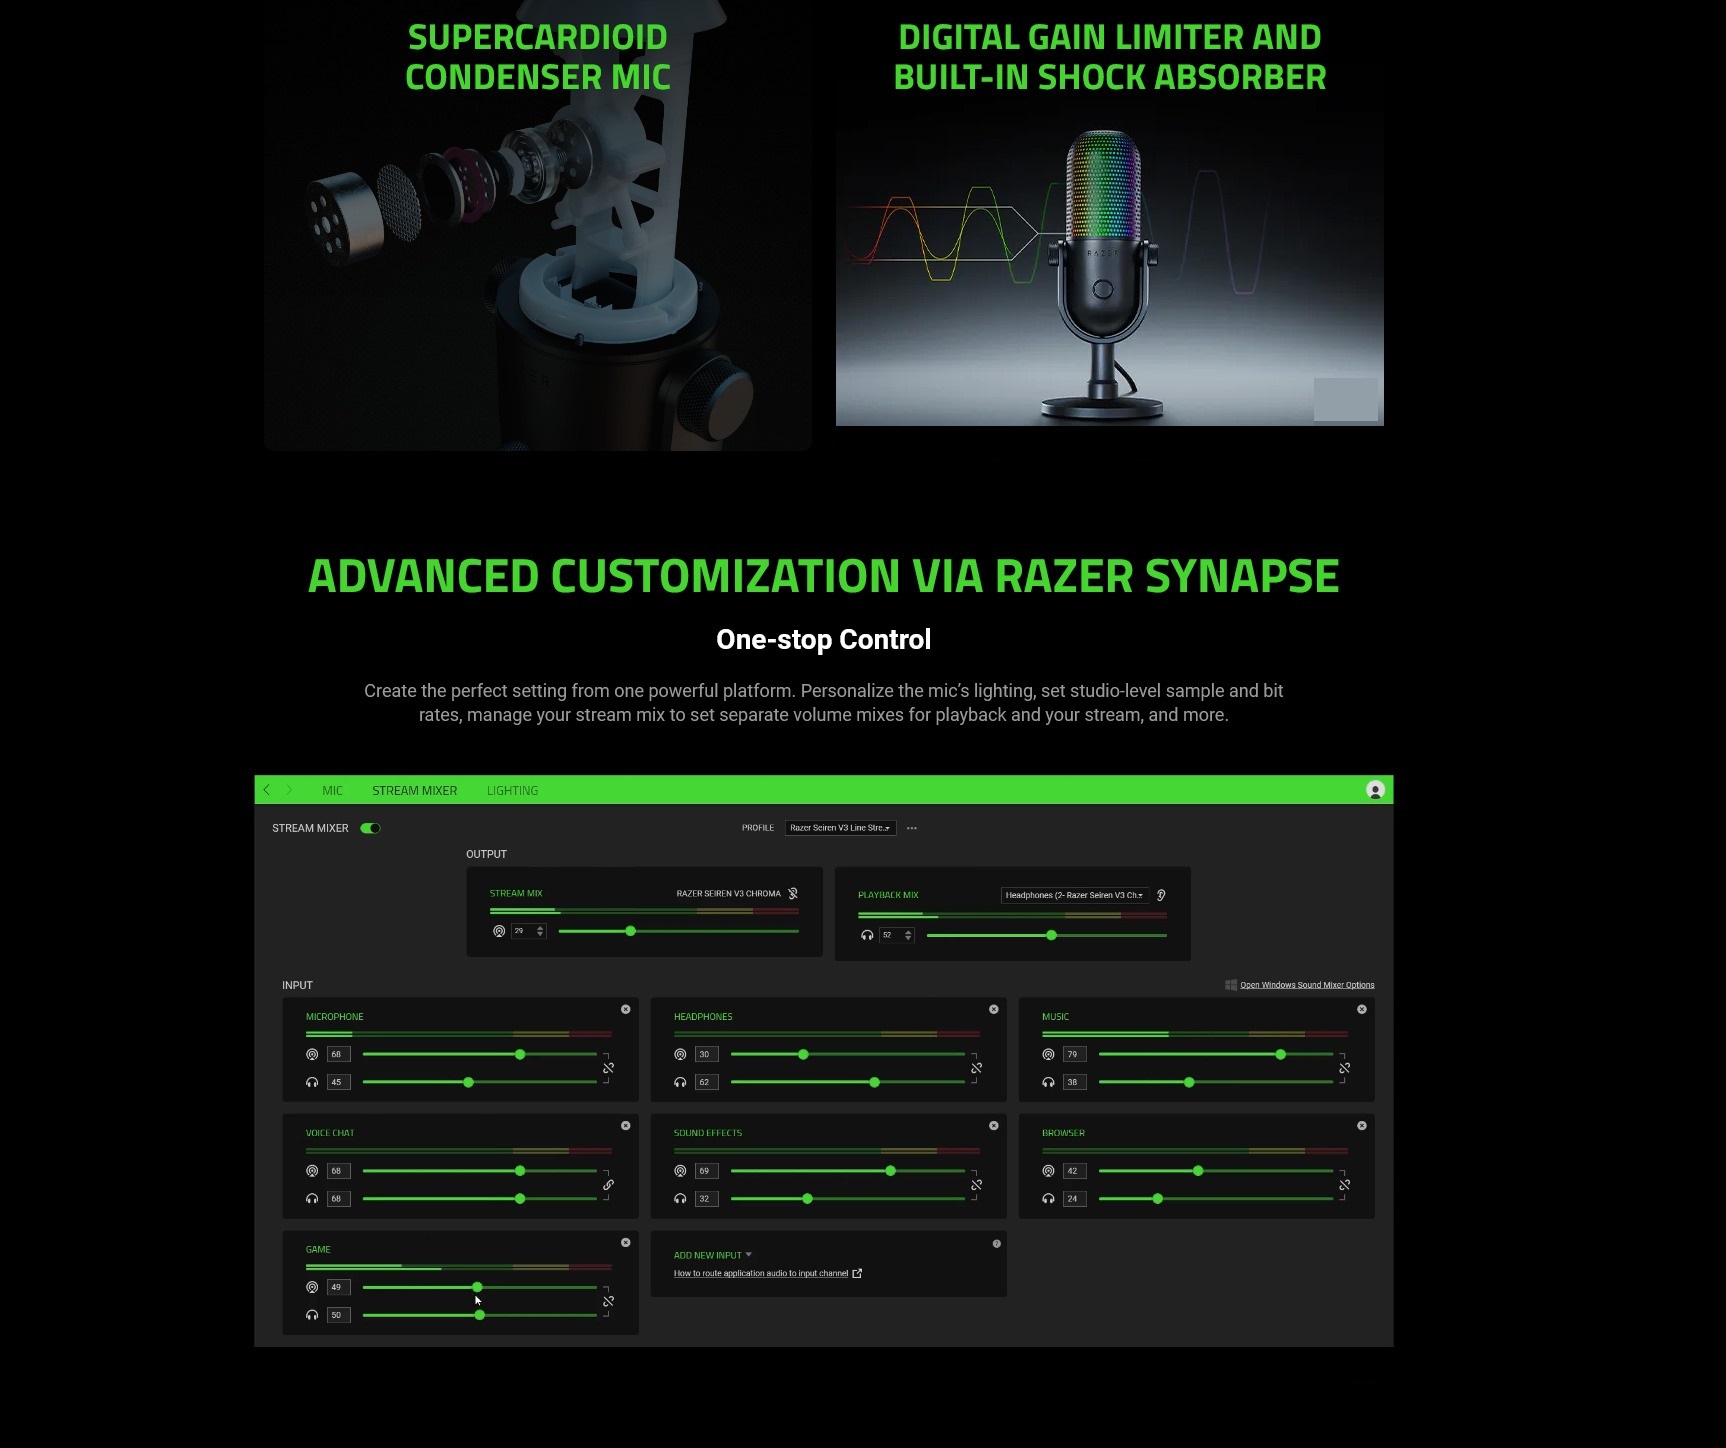 A large marketing image providing additional information about the product Razer Seiren V3 Chroma - RGB USB Microphone with Tap-to-Mute - Additional alt info not provided